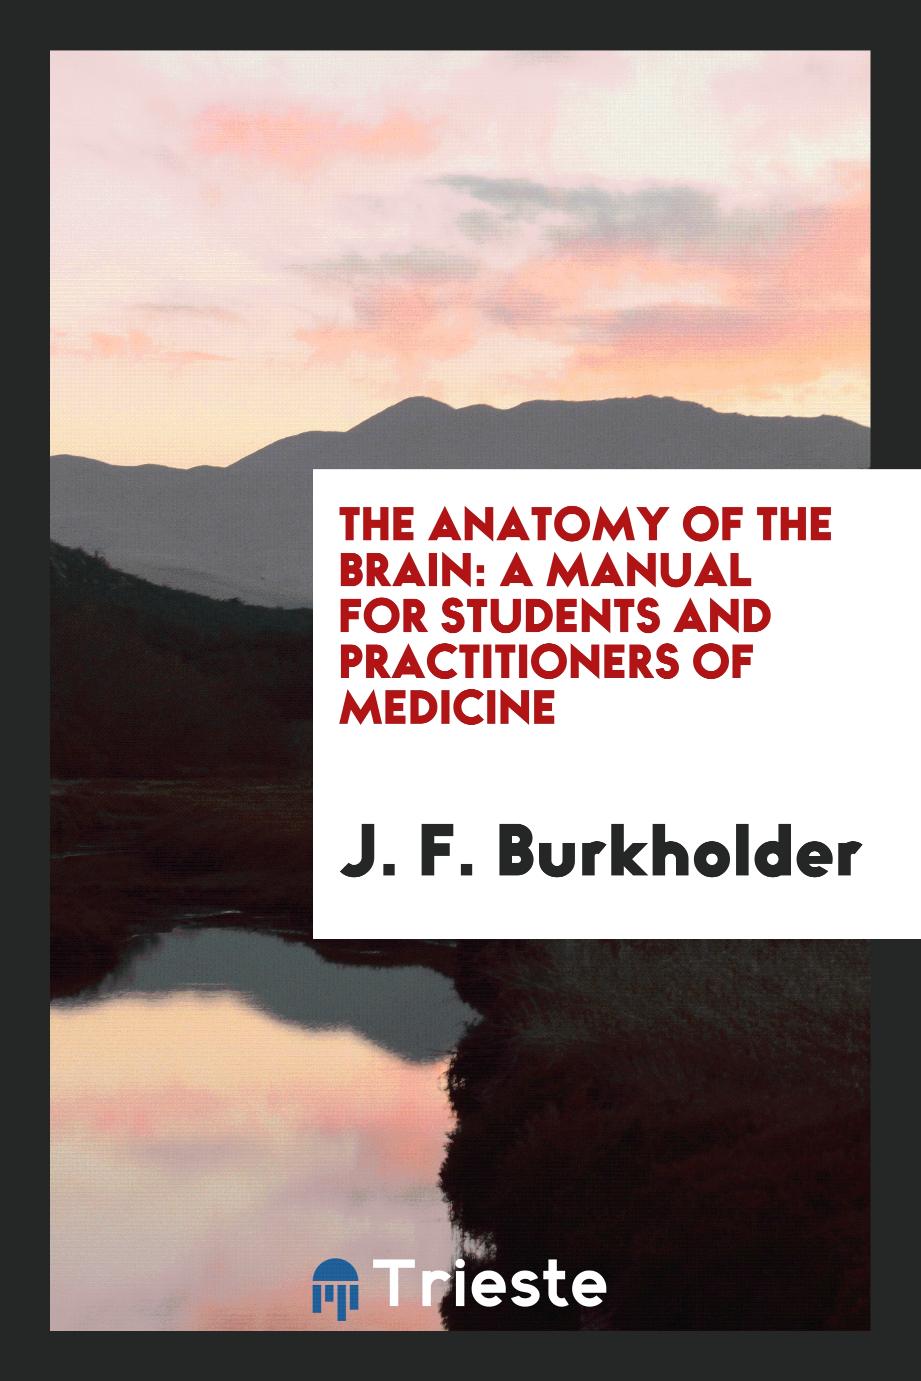 The Anatomy of the Brain: A Manual for Students and Practitioners of Medicine